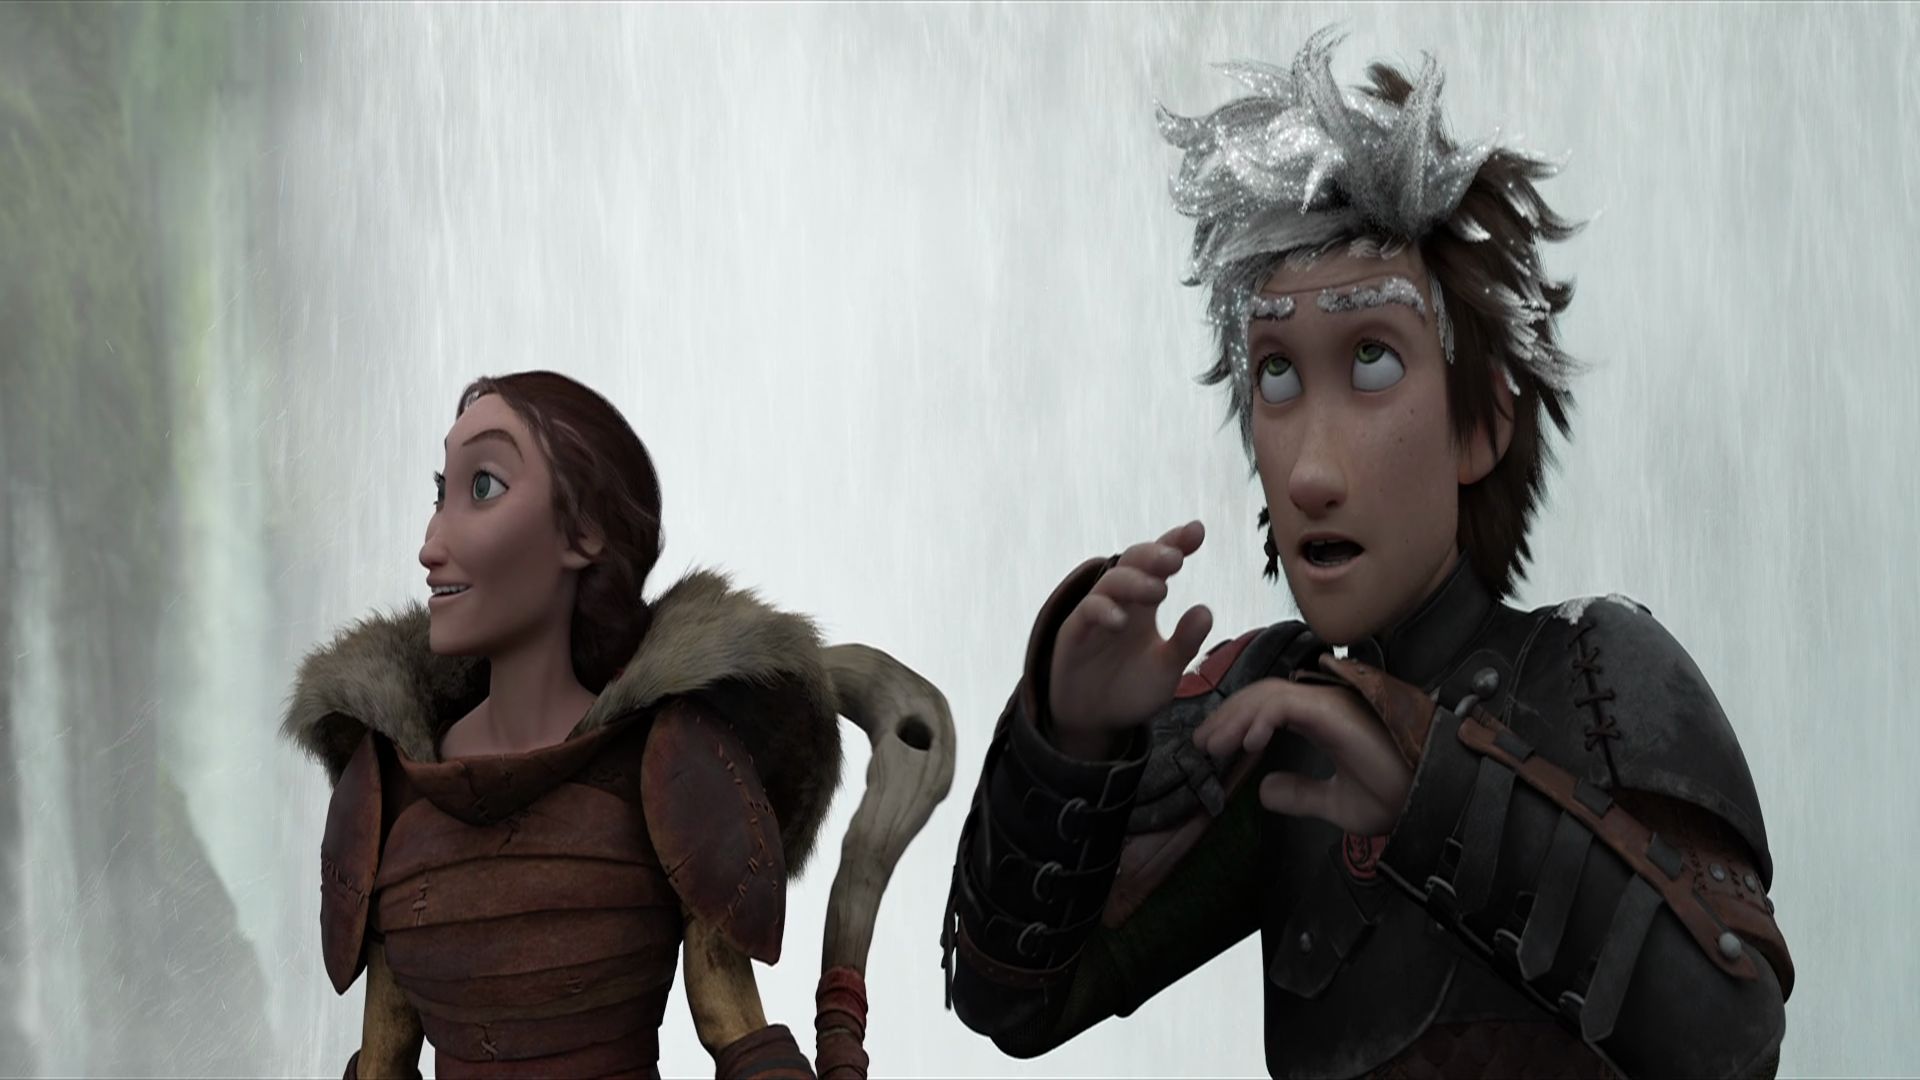 movie, how to train your dragon 2, hiccup (how to train your dragon), valka (how to train your dragon), how to train your dragon